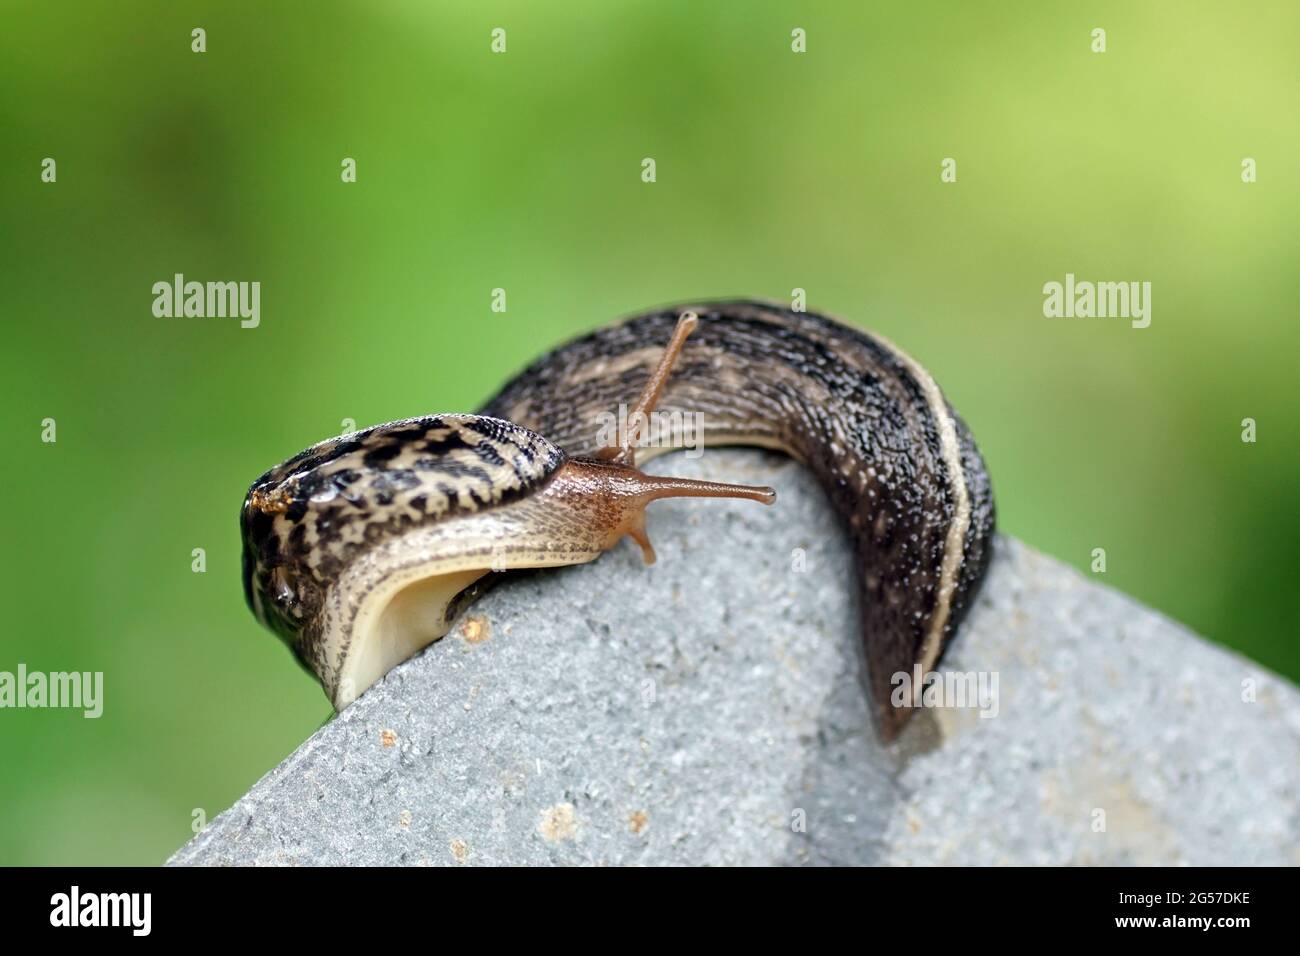 Closeup shot of a tiger snail on the stone Stock Photo